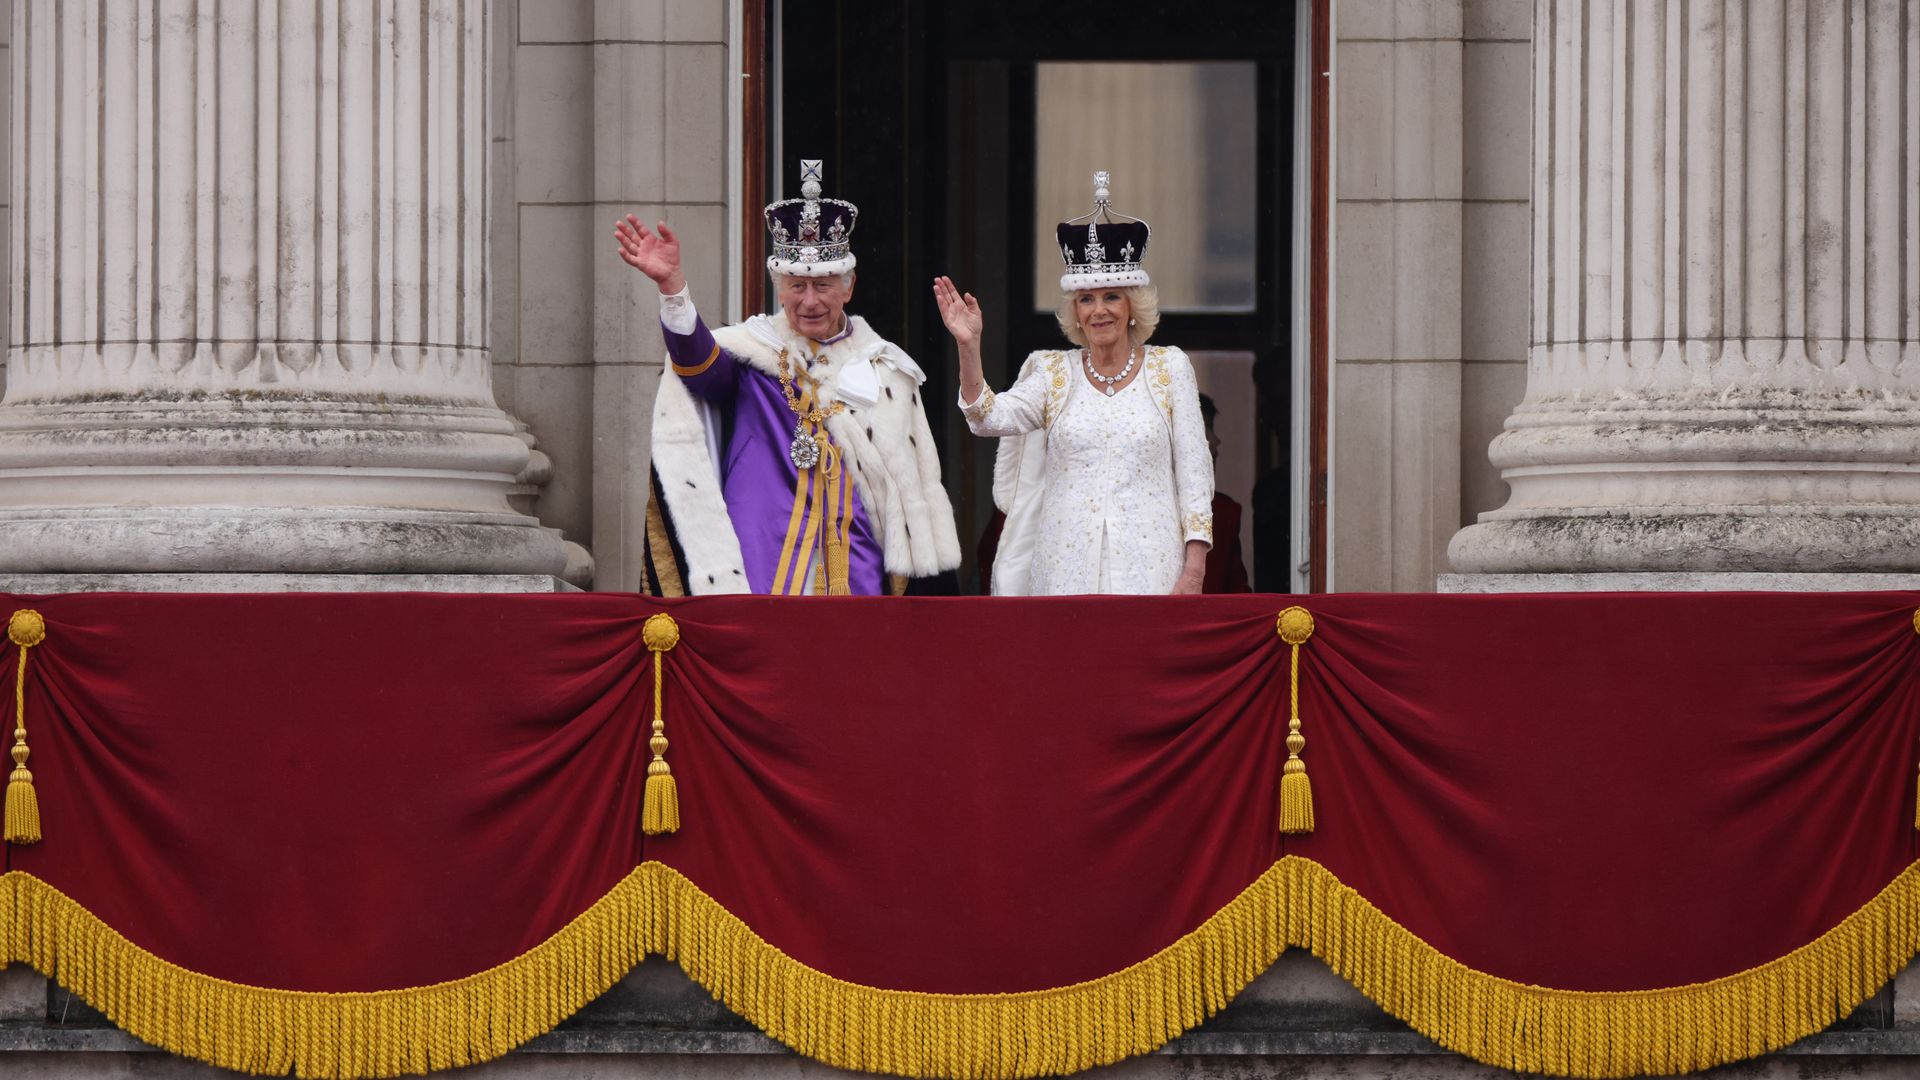 King Charles III and Queen Camilla will take official photographs with their families after the balcony appearance